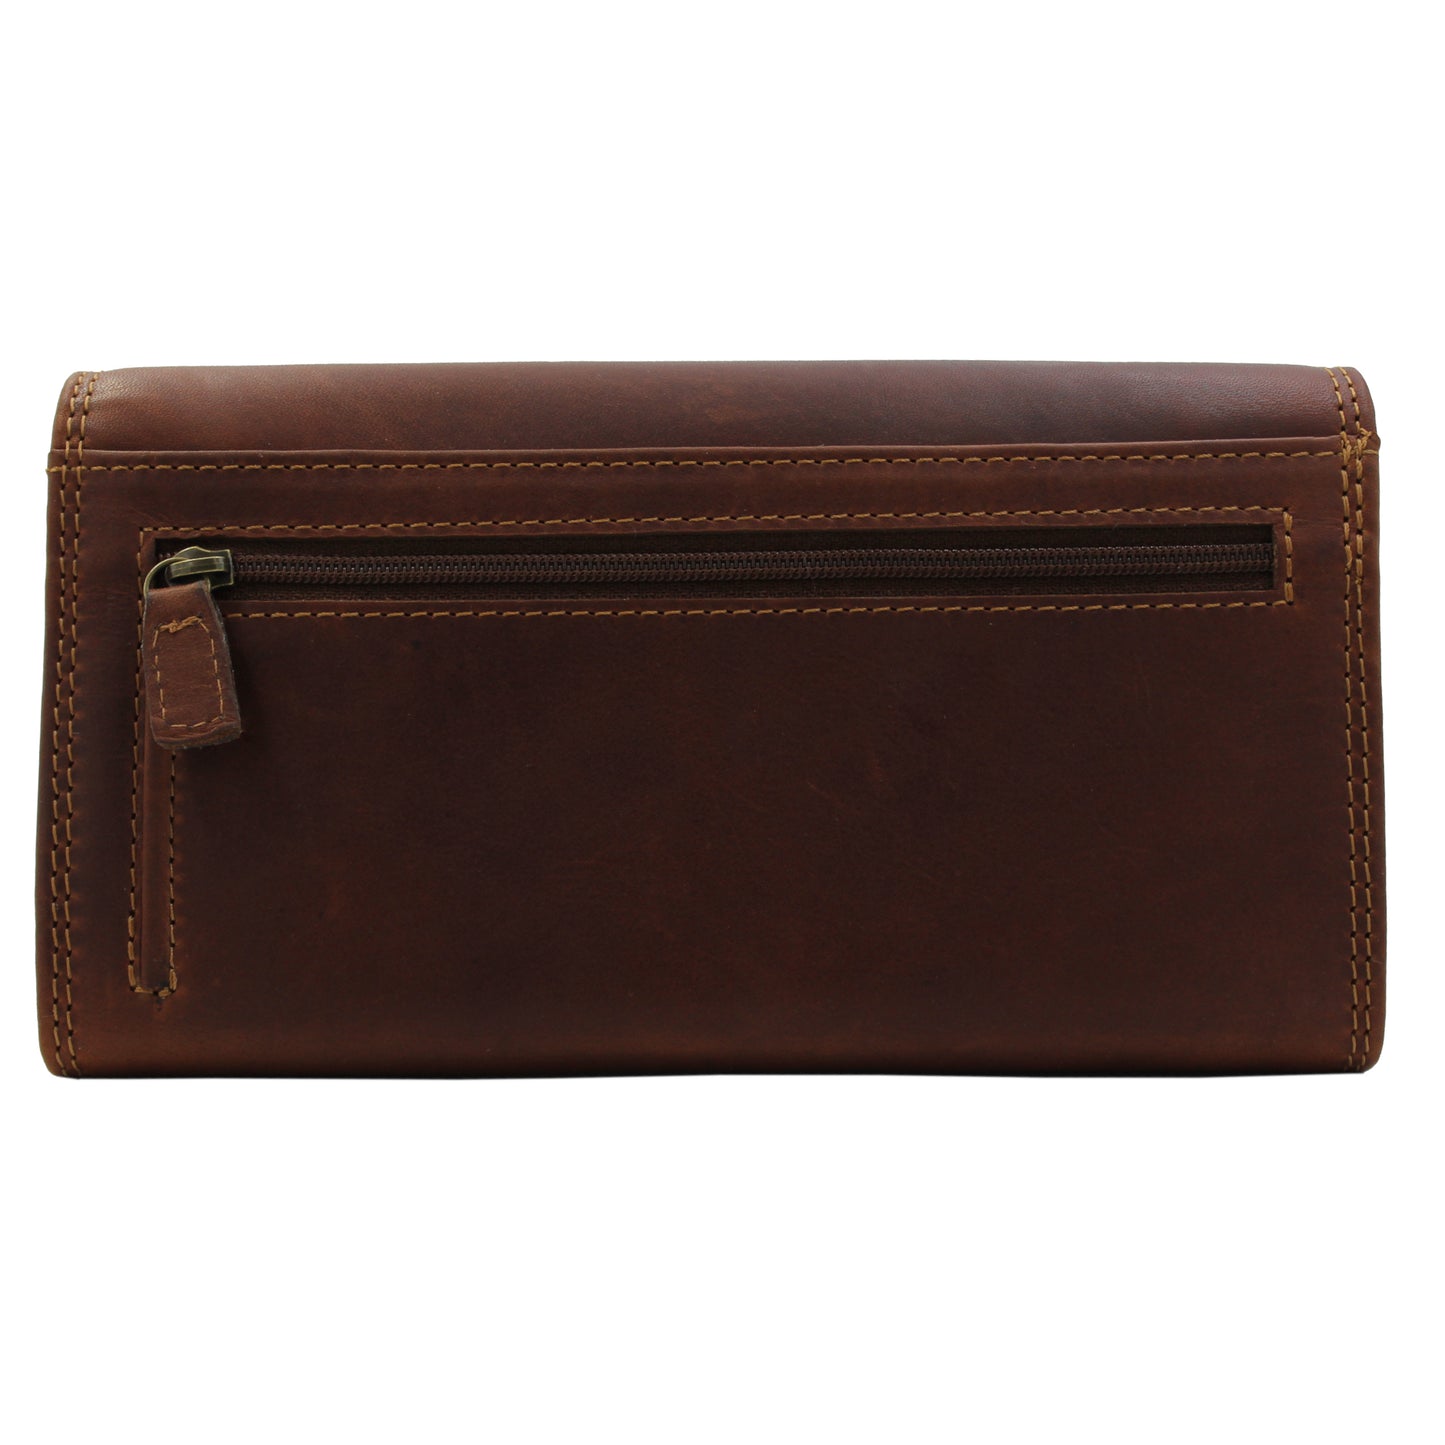 RE Leather Wallet - Clutch